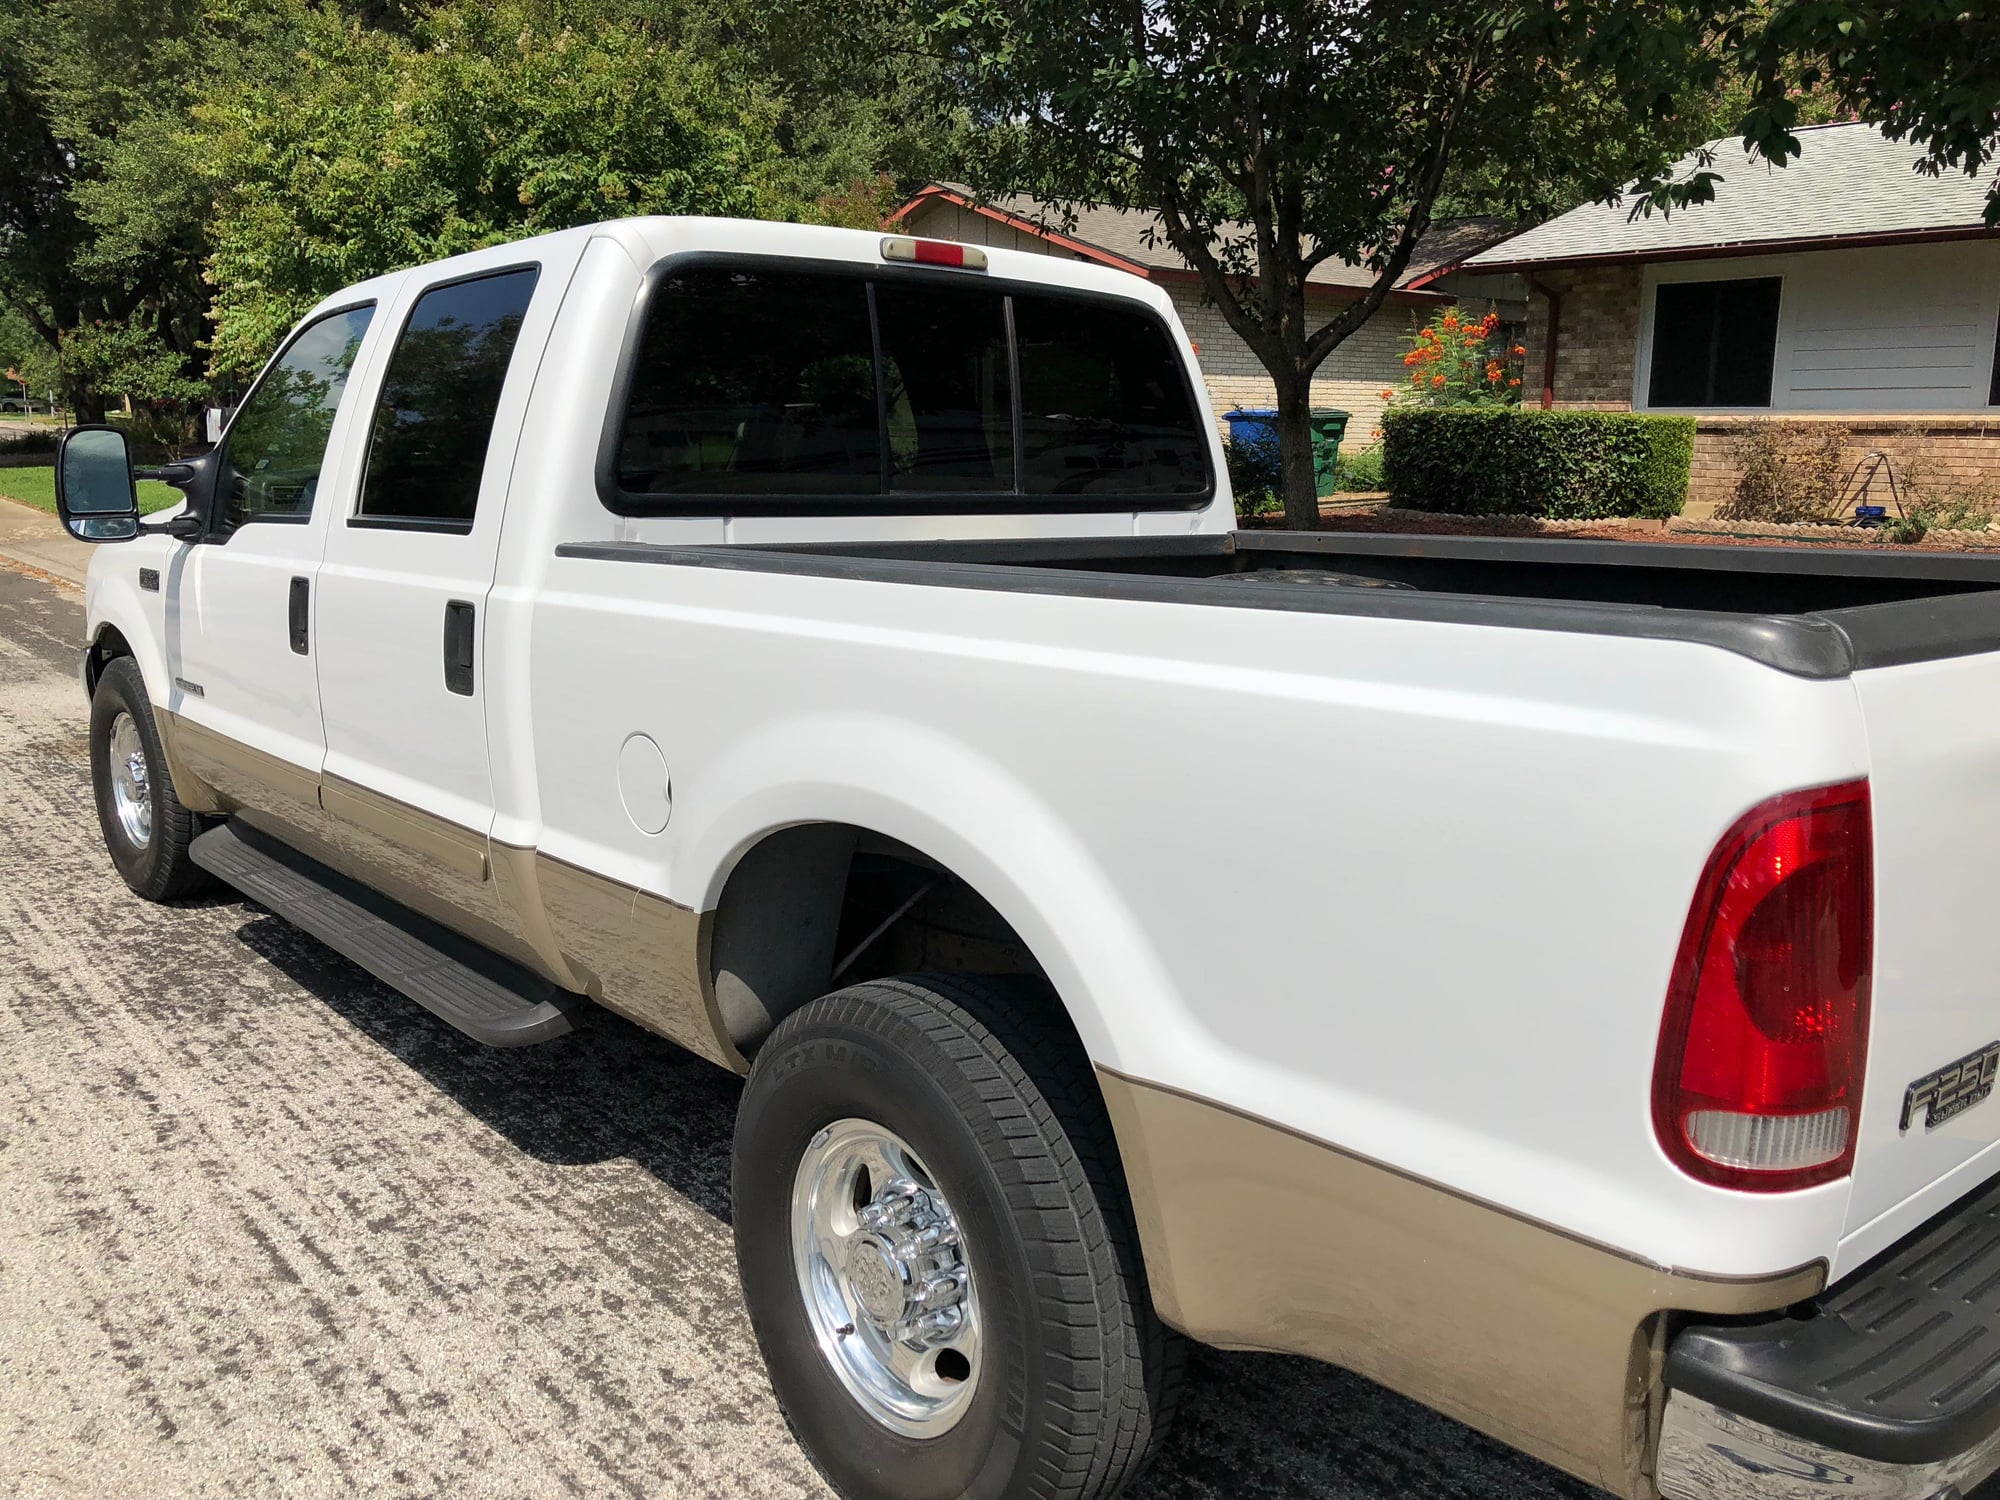 2001 Ford F-250 Super Duty - Immaculate 01 Crewcab F250 - Used - VIN 1FTNW20F51EA86656 - 230,000 Miles - 8 cyl - 2WD - Automatic - Truck - White - San Antonio, TX 78247, United States